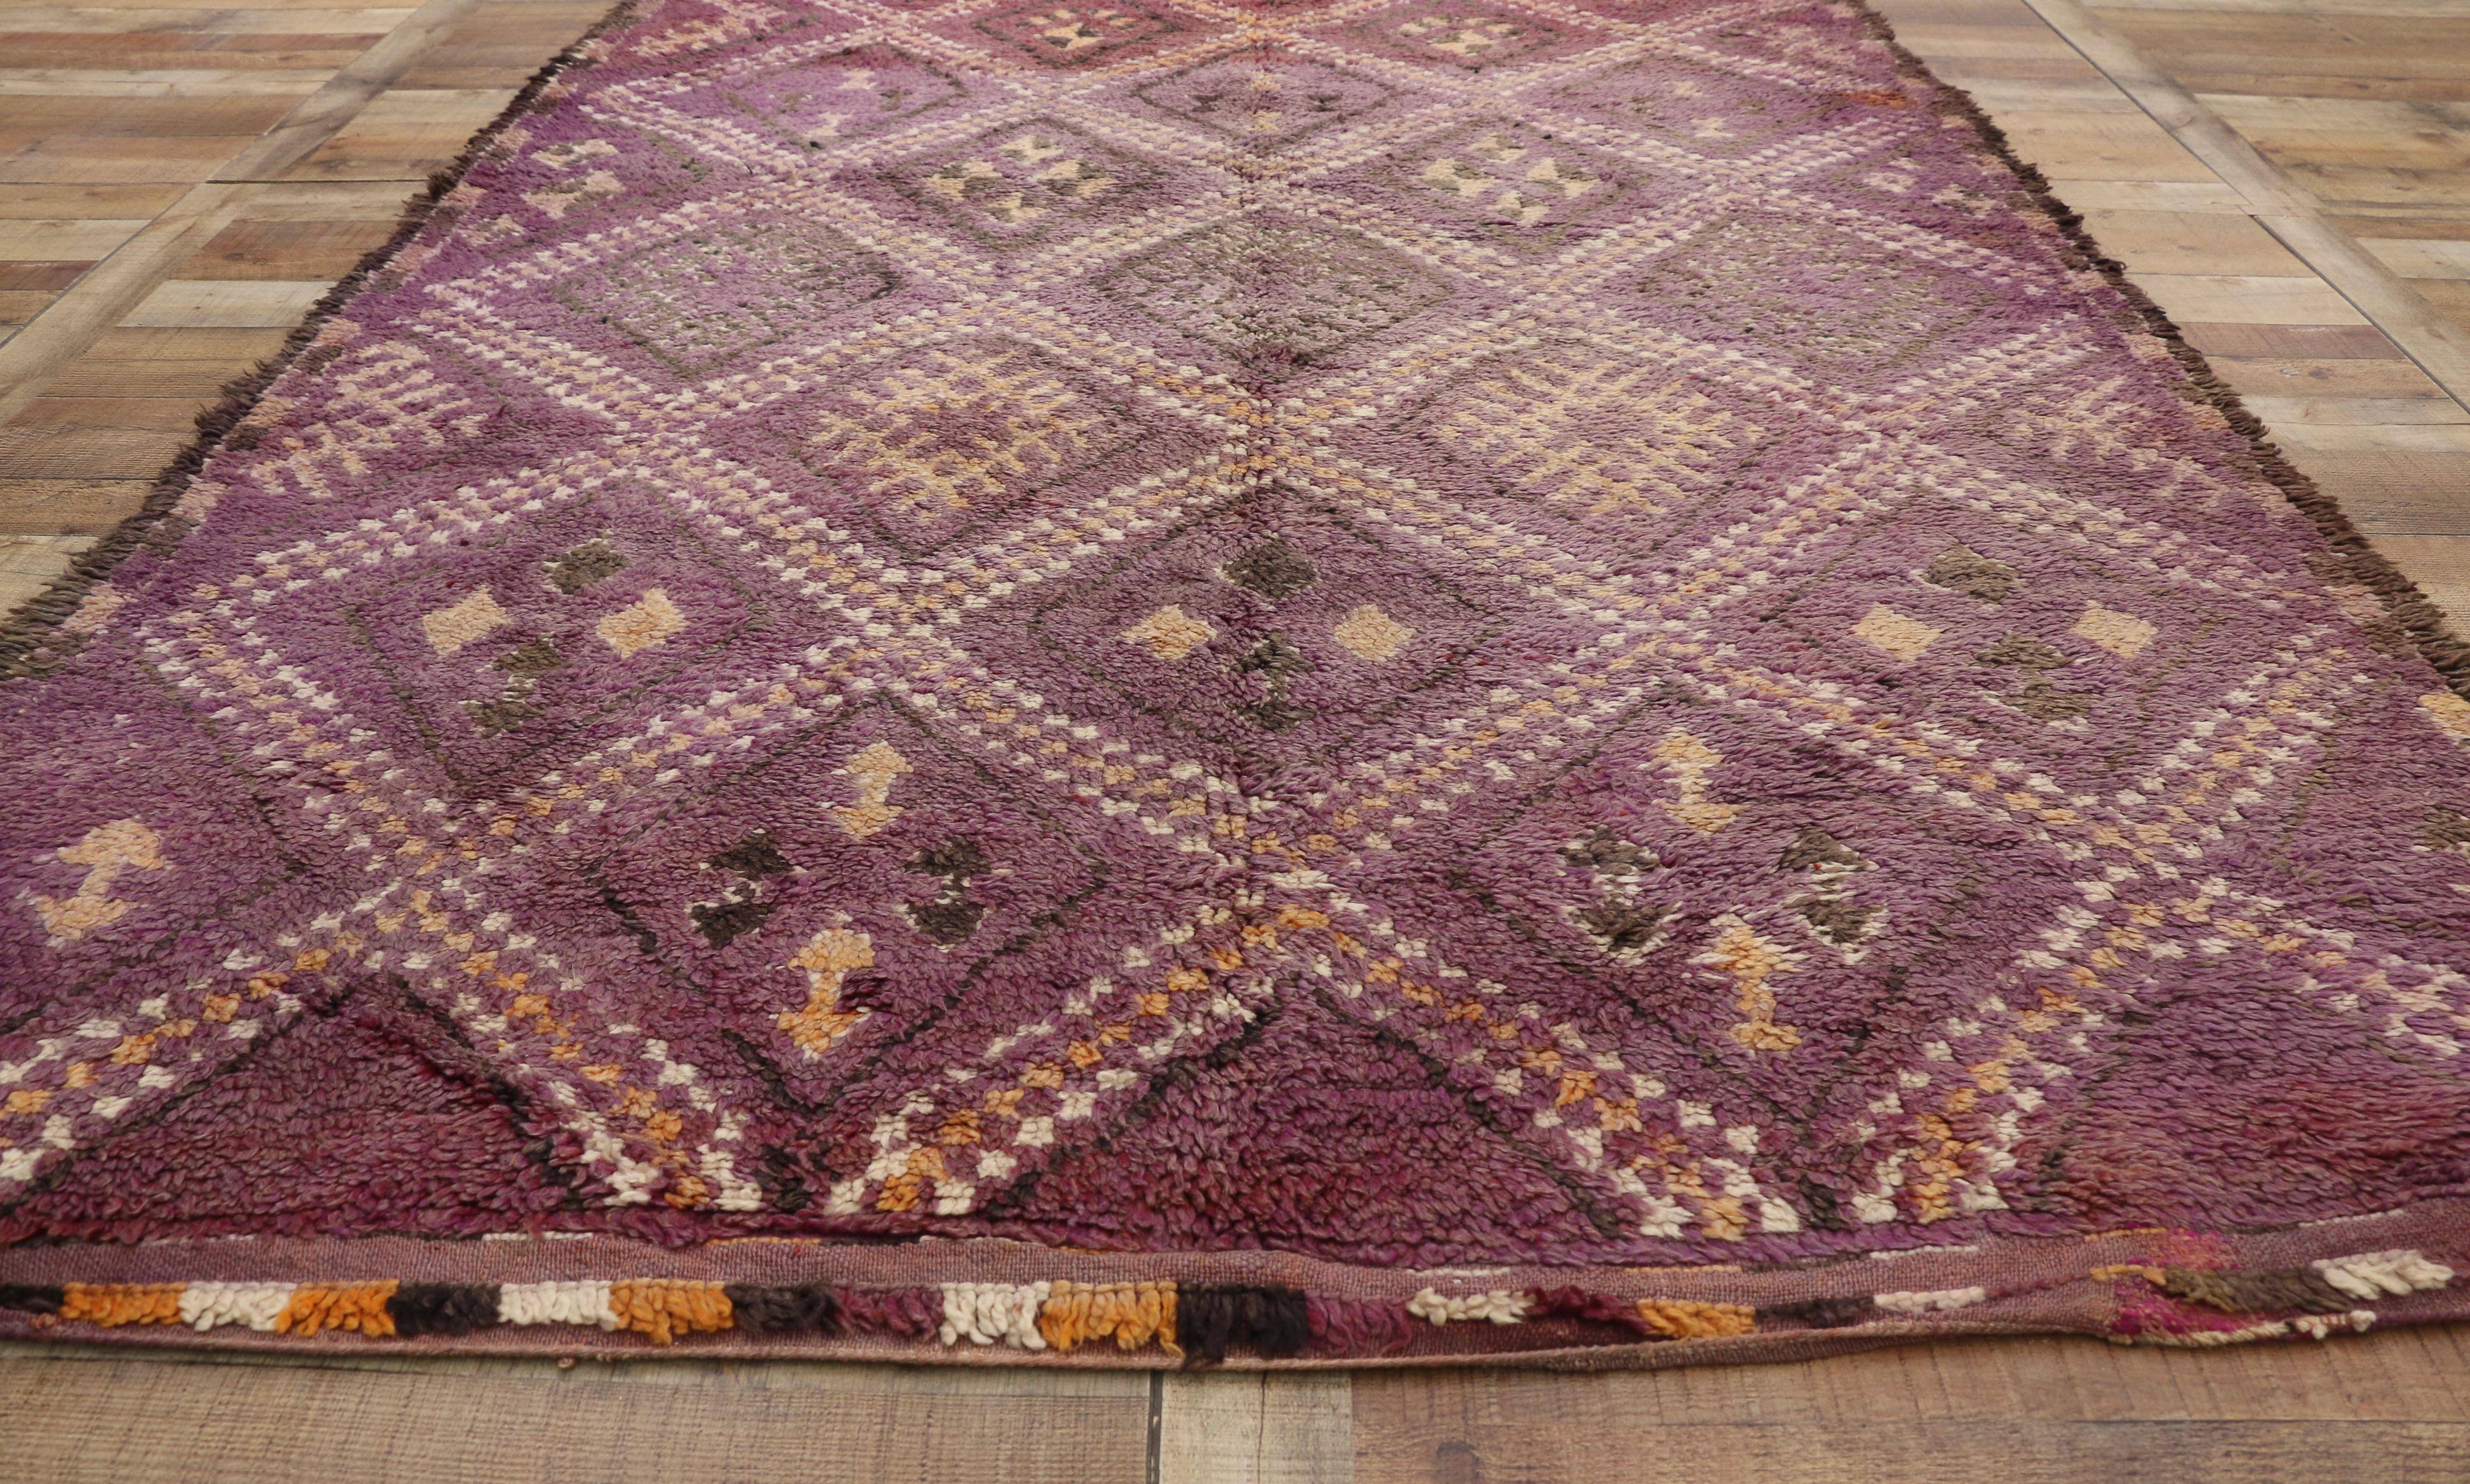 Vintage Berber Moroccan Rug with Post-Modern Memphis Bohemian Style 2